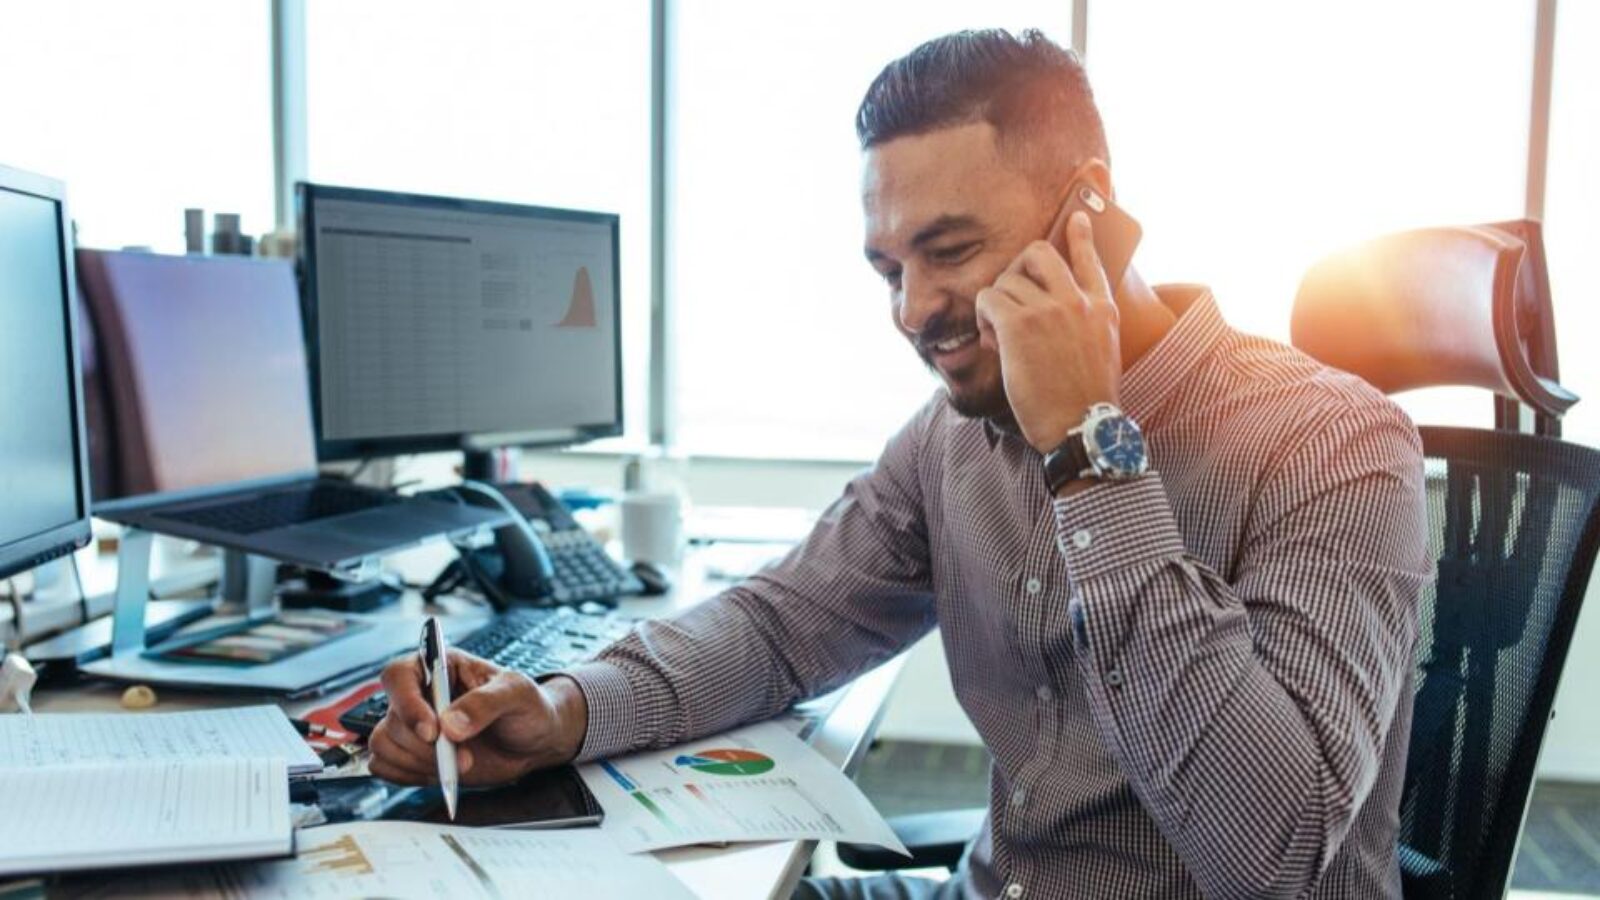 A B2B seller works on revenue forecasting while sitting at his desk on a phone call.